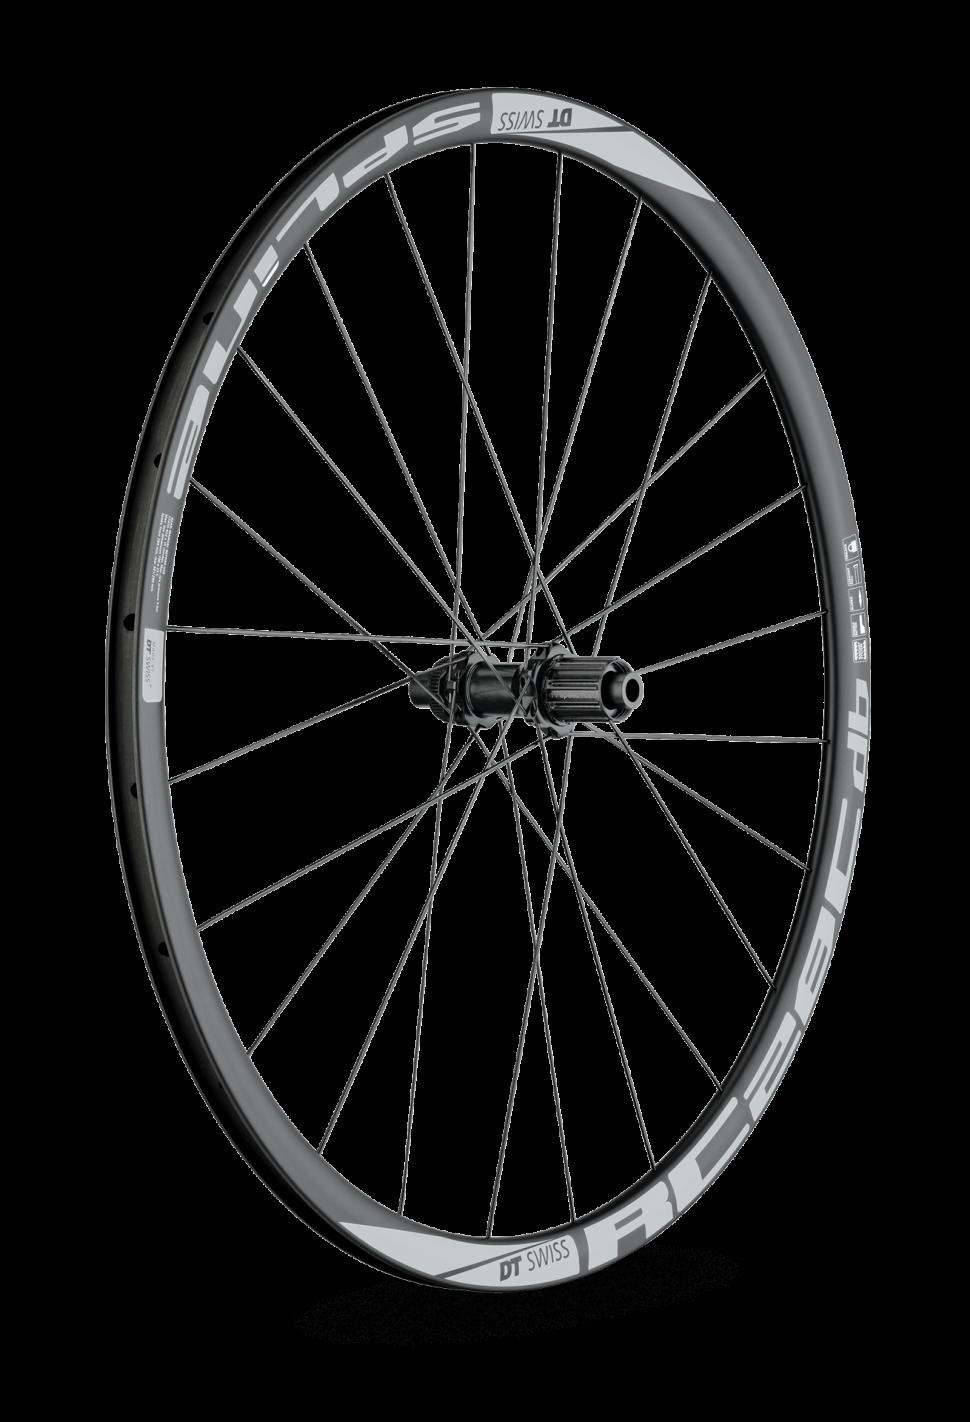 DT Swiss release thru-axle disc brake wheels with tubeless